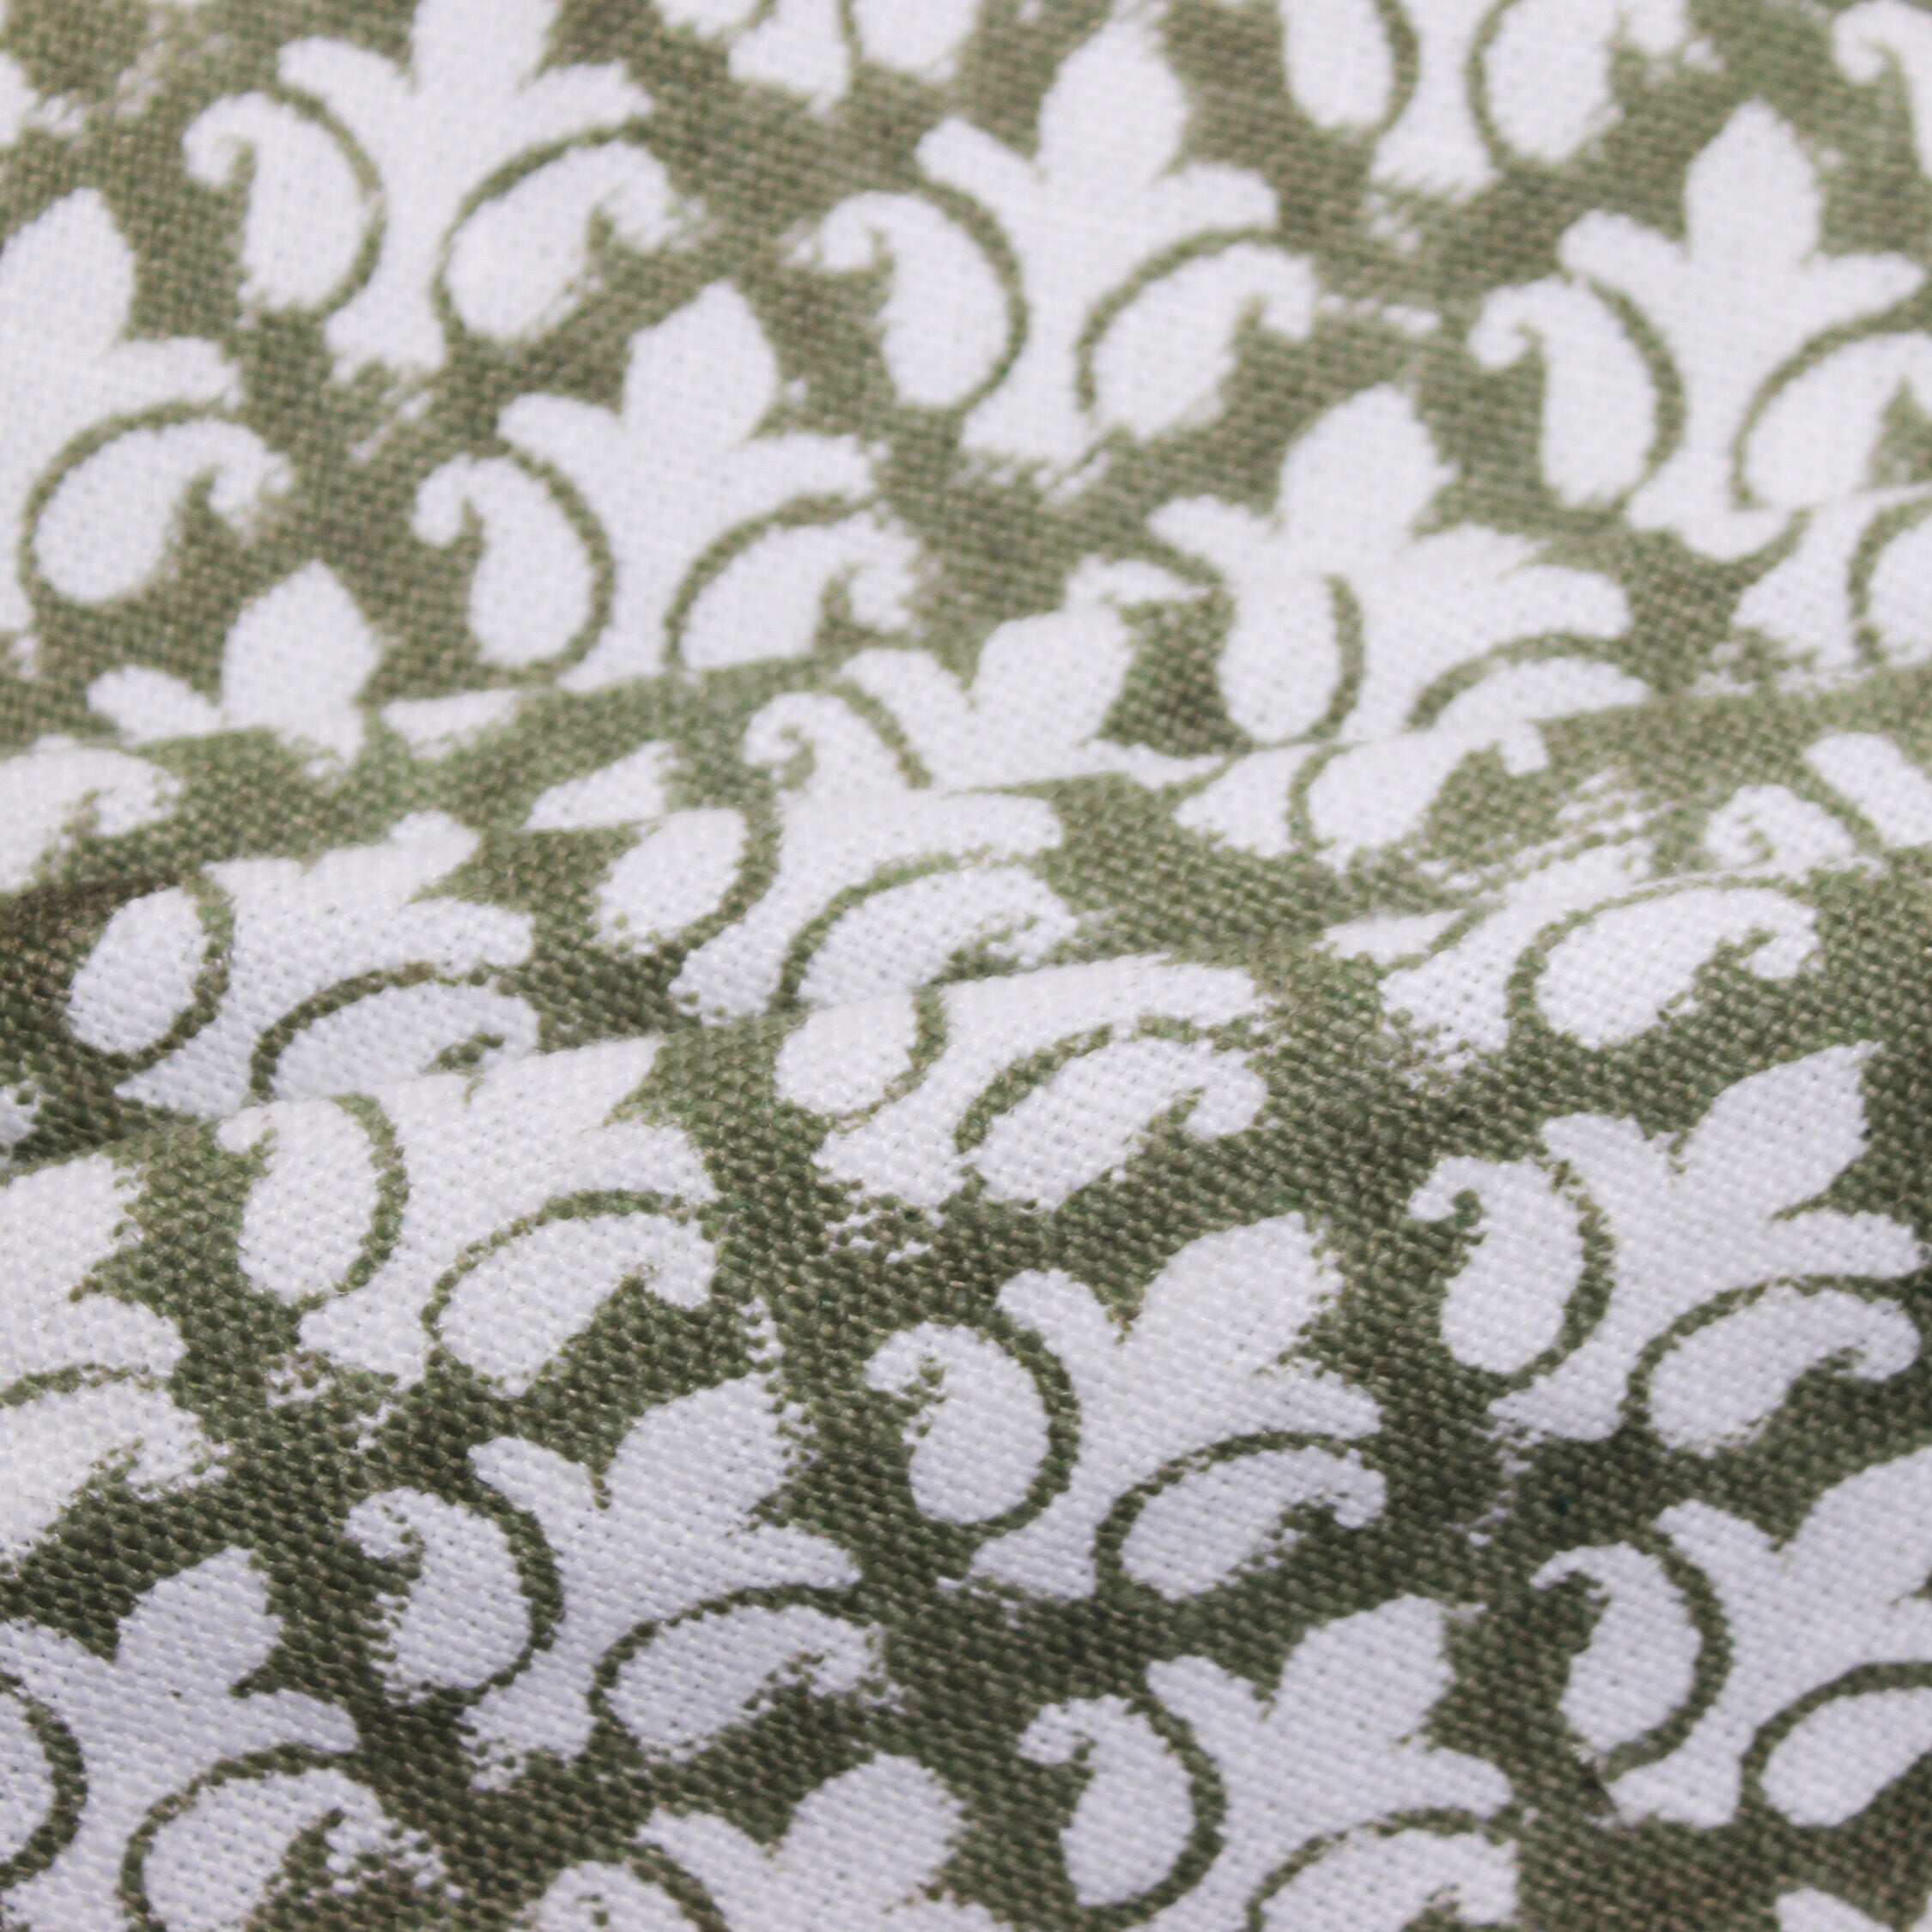 Block Print Linen Fabric,Heavy Offwhite Linen,Natural Hand Loom Fabric,Fabric By The Yard